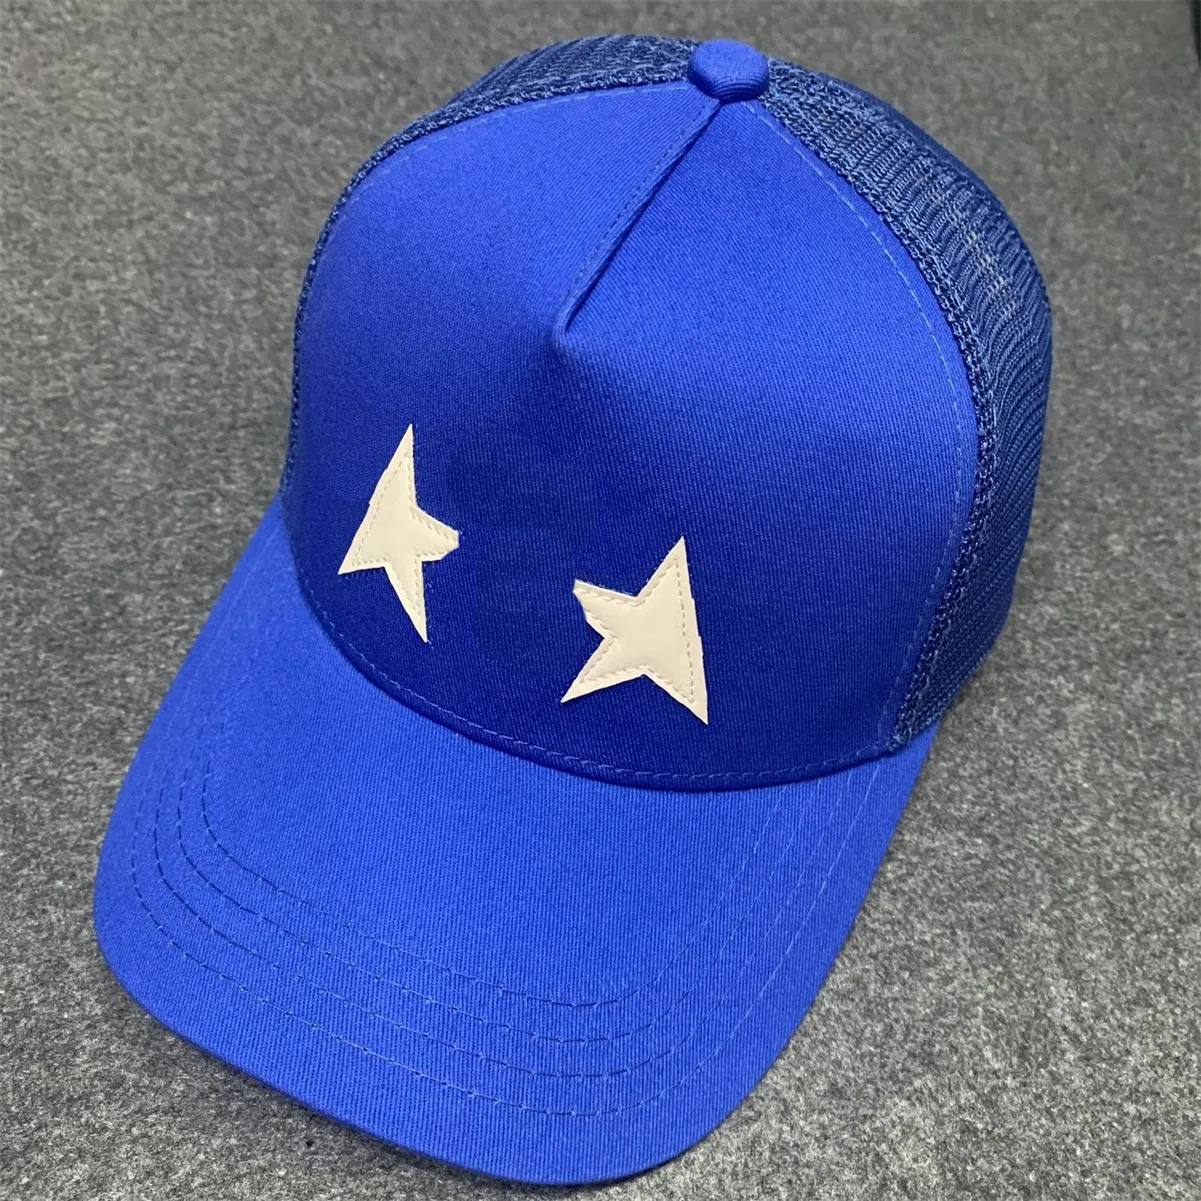 2023 Graffiti Printed Alphabet Mens Blue Baseball Cap For Men And Women  Designer Trucker Hat With Five Pointed Star Design For Outdoor Sports And  Summer Visor From Ninthsister, $12.07